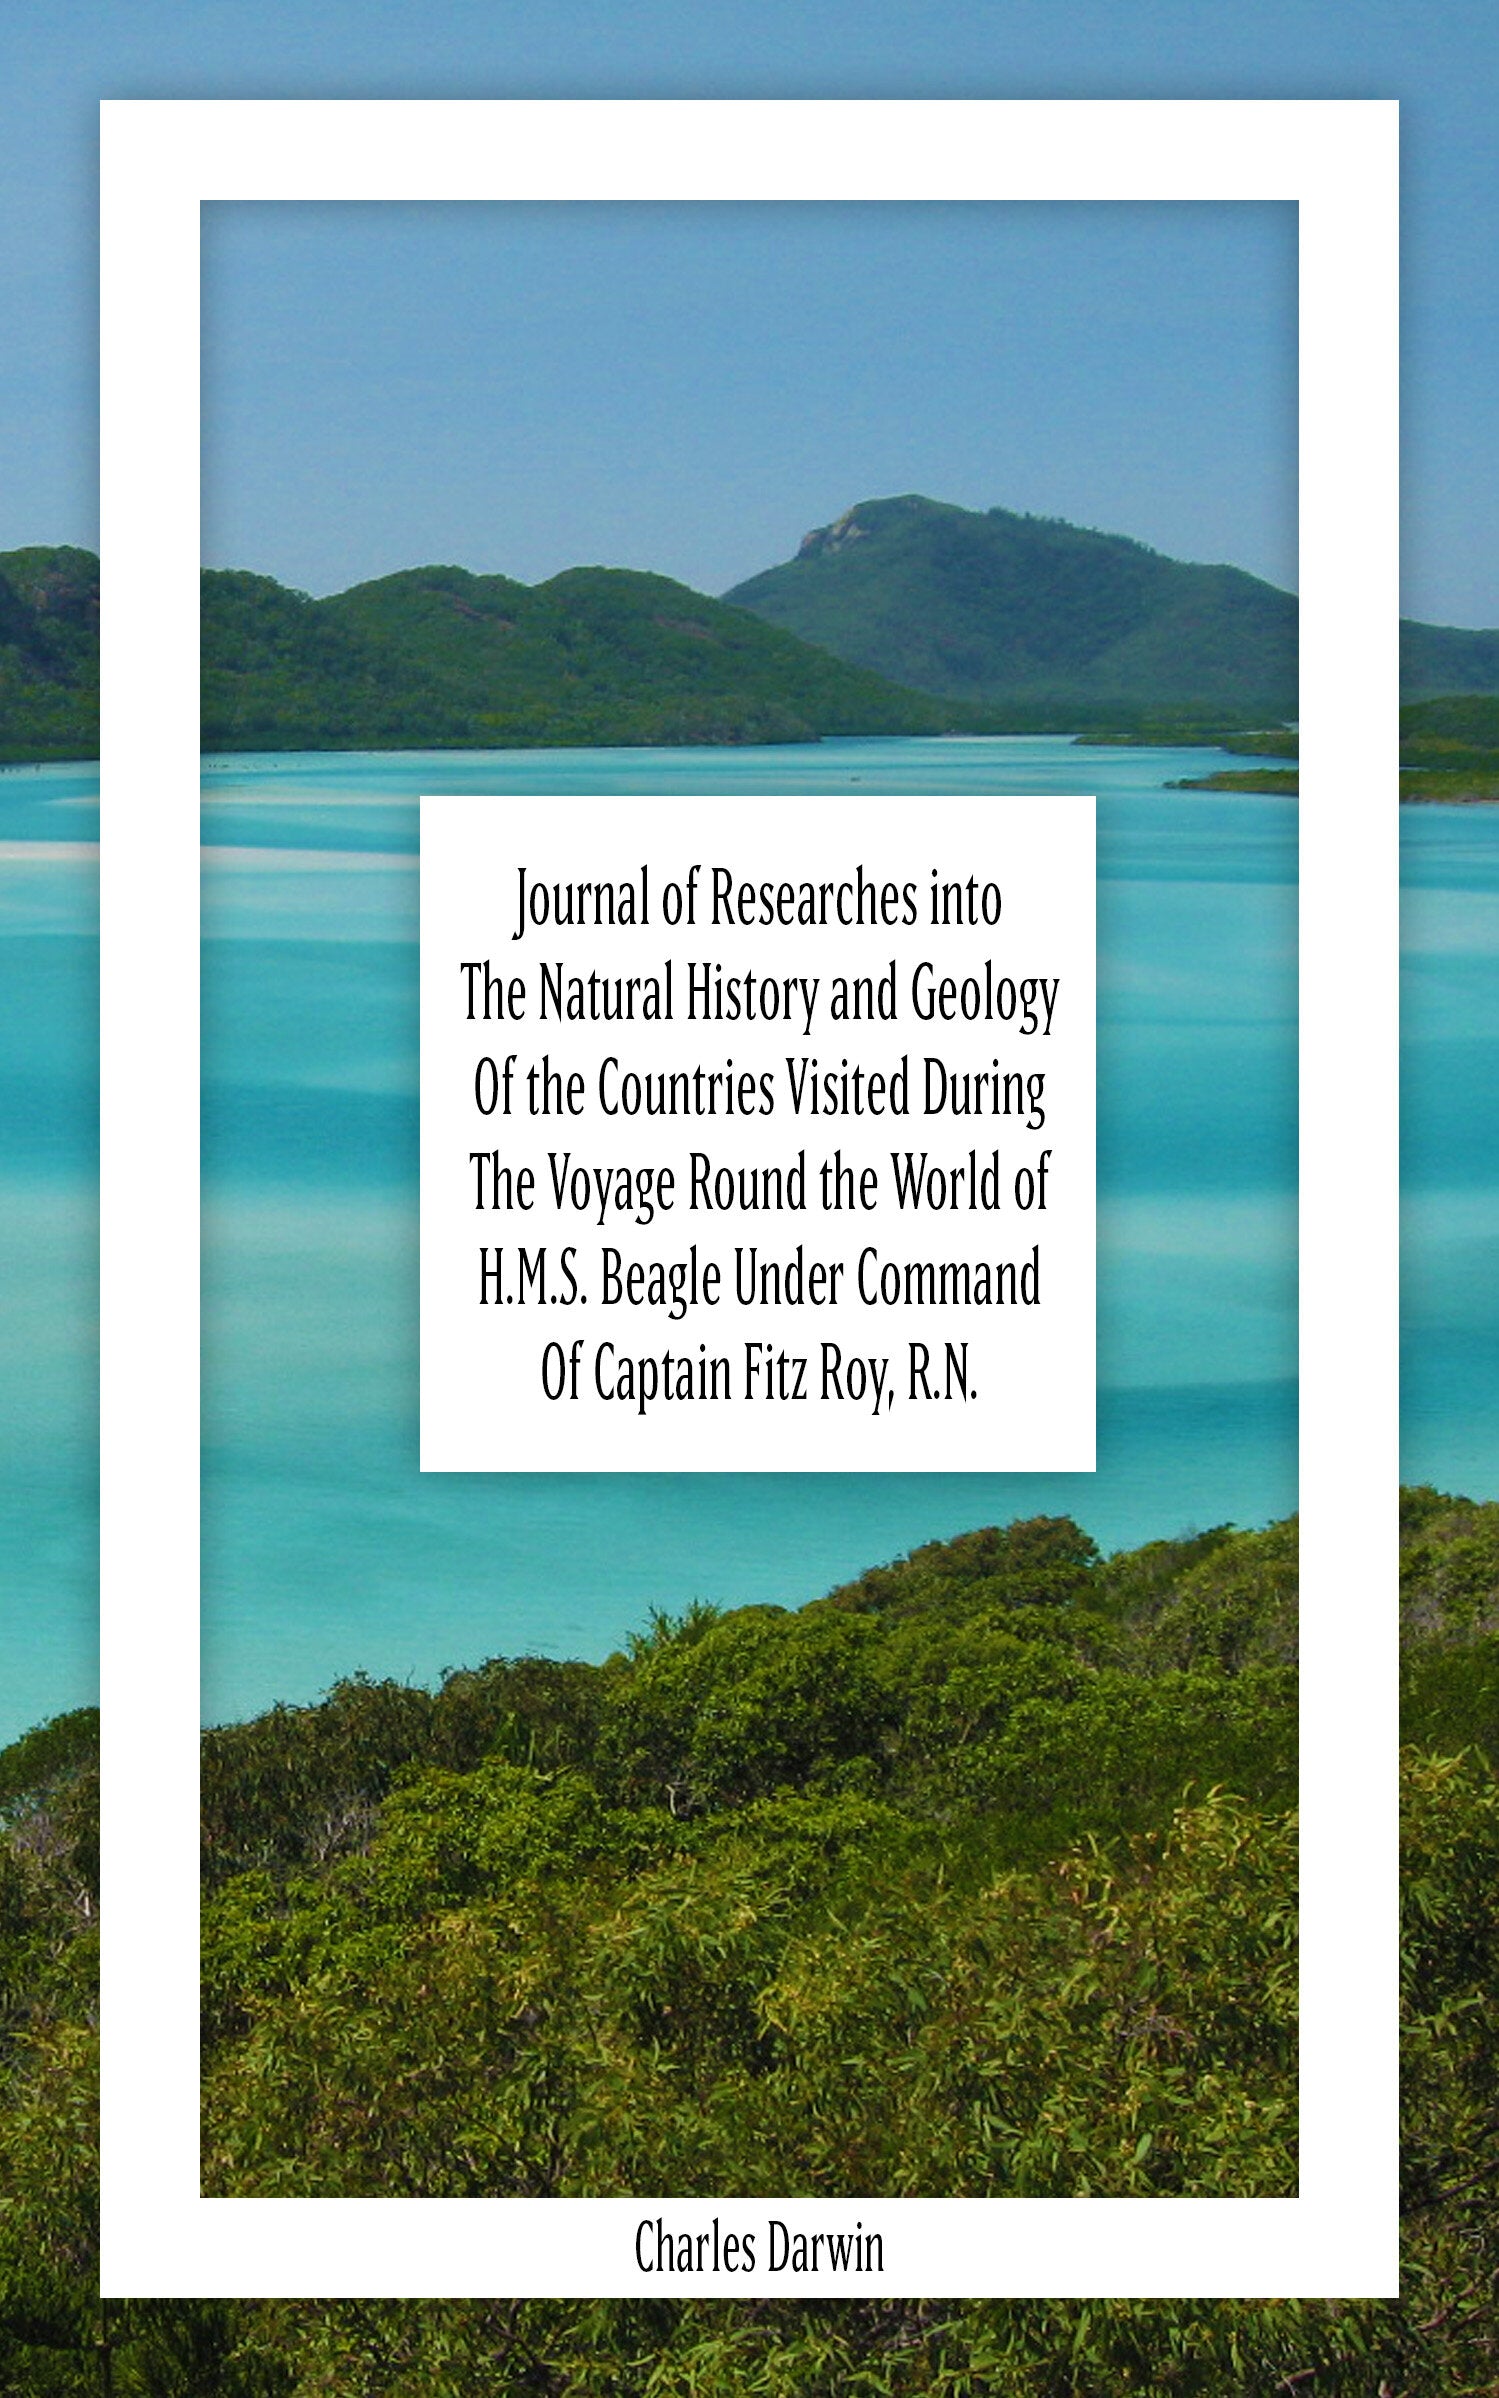 Journal of Researches into The Natural History and Geology Of the Countries Visited During The Voyage Round the World of H.M.S. Beagle Under Command Of Captain Fitz Roy, R.N.